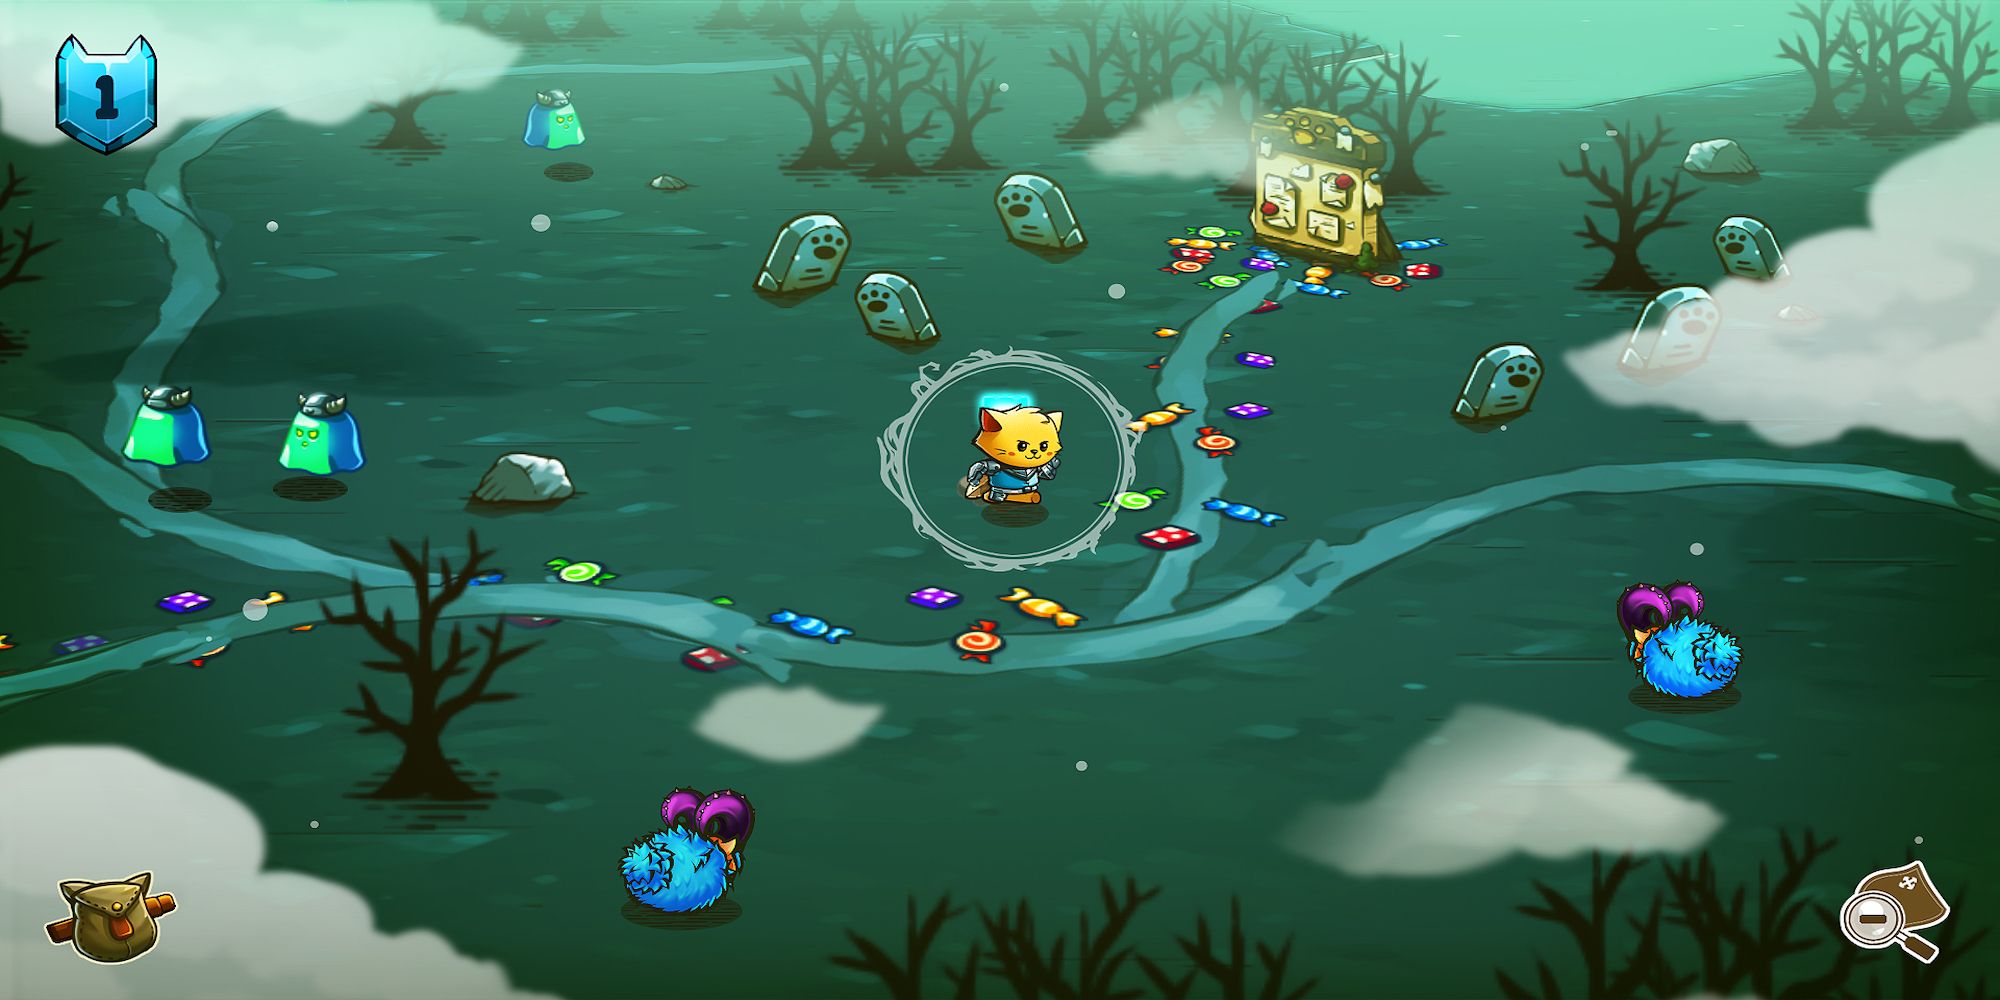 The gameplay of Cat Quest